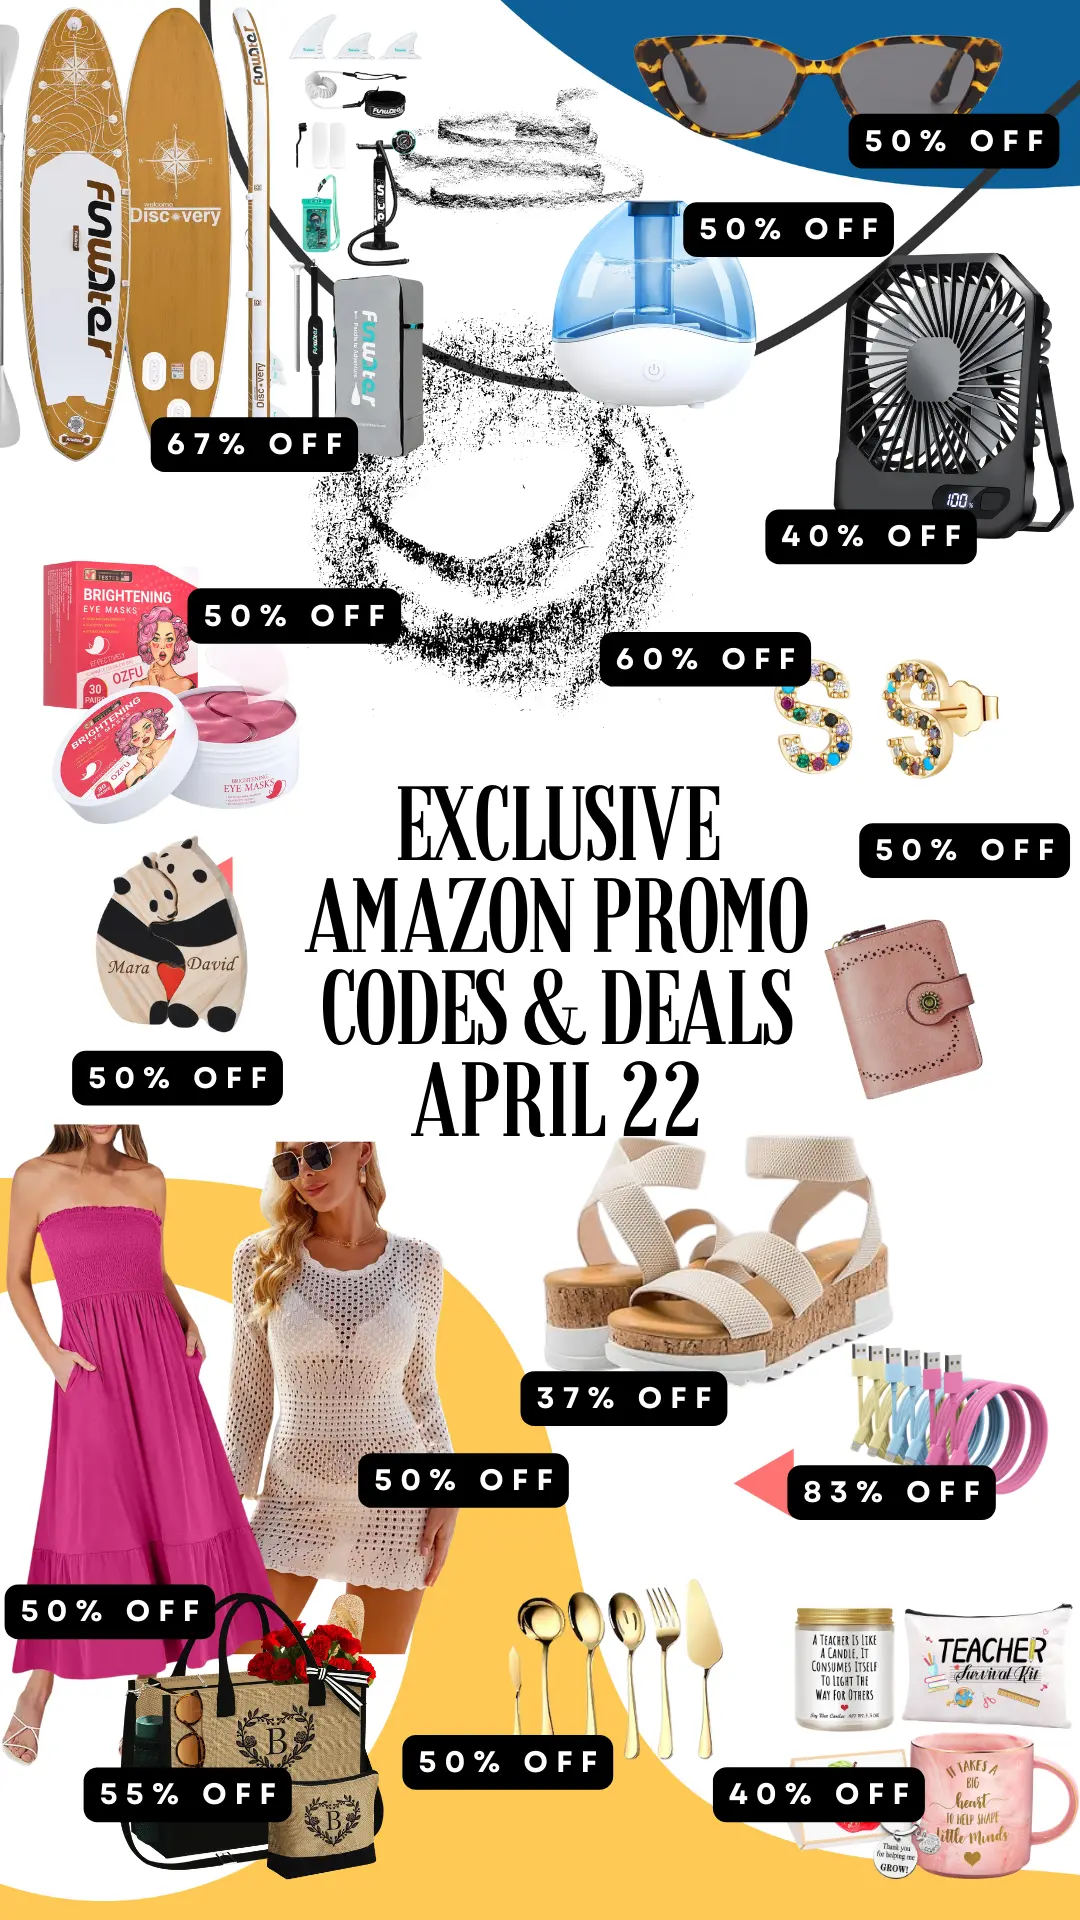 EXCLUSIVE Amazon Deals and Codes: Your Daily Savings for April 22